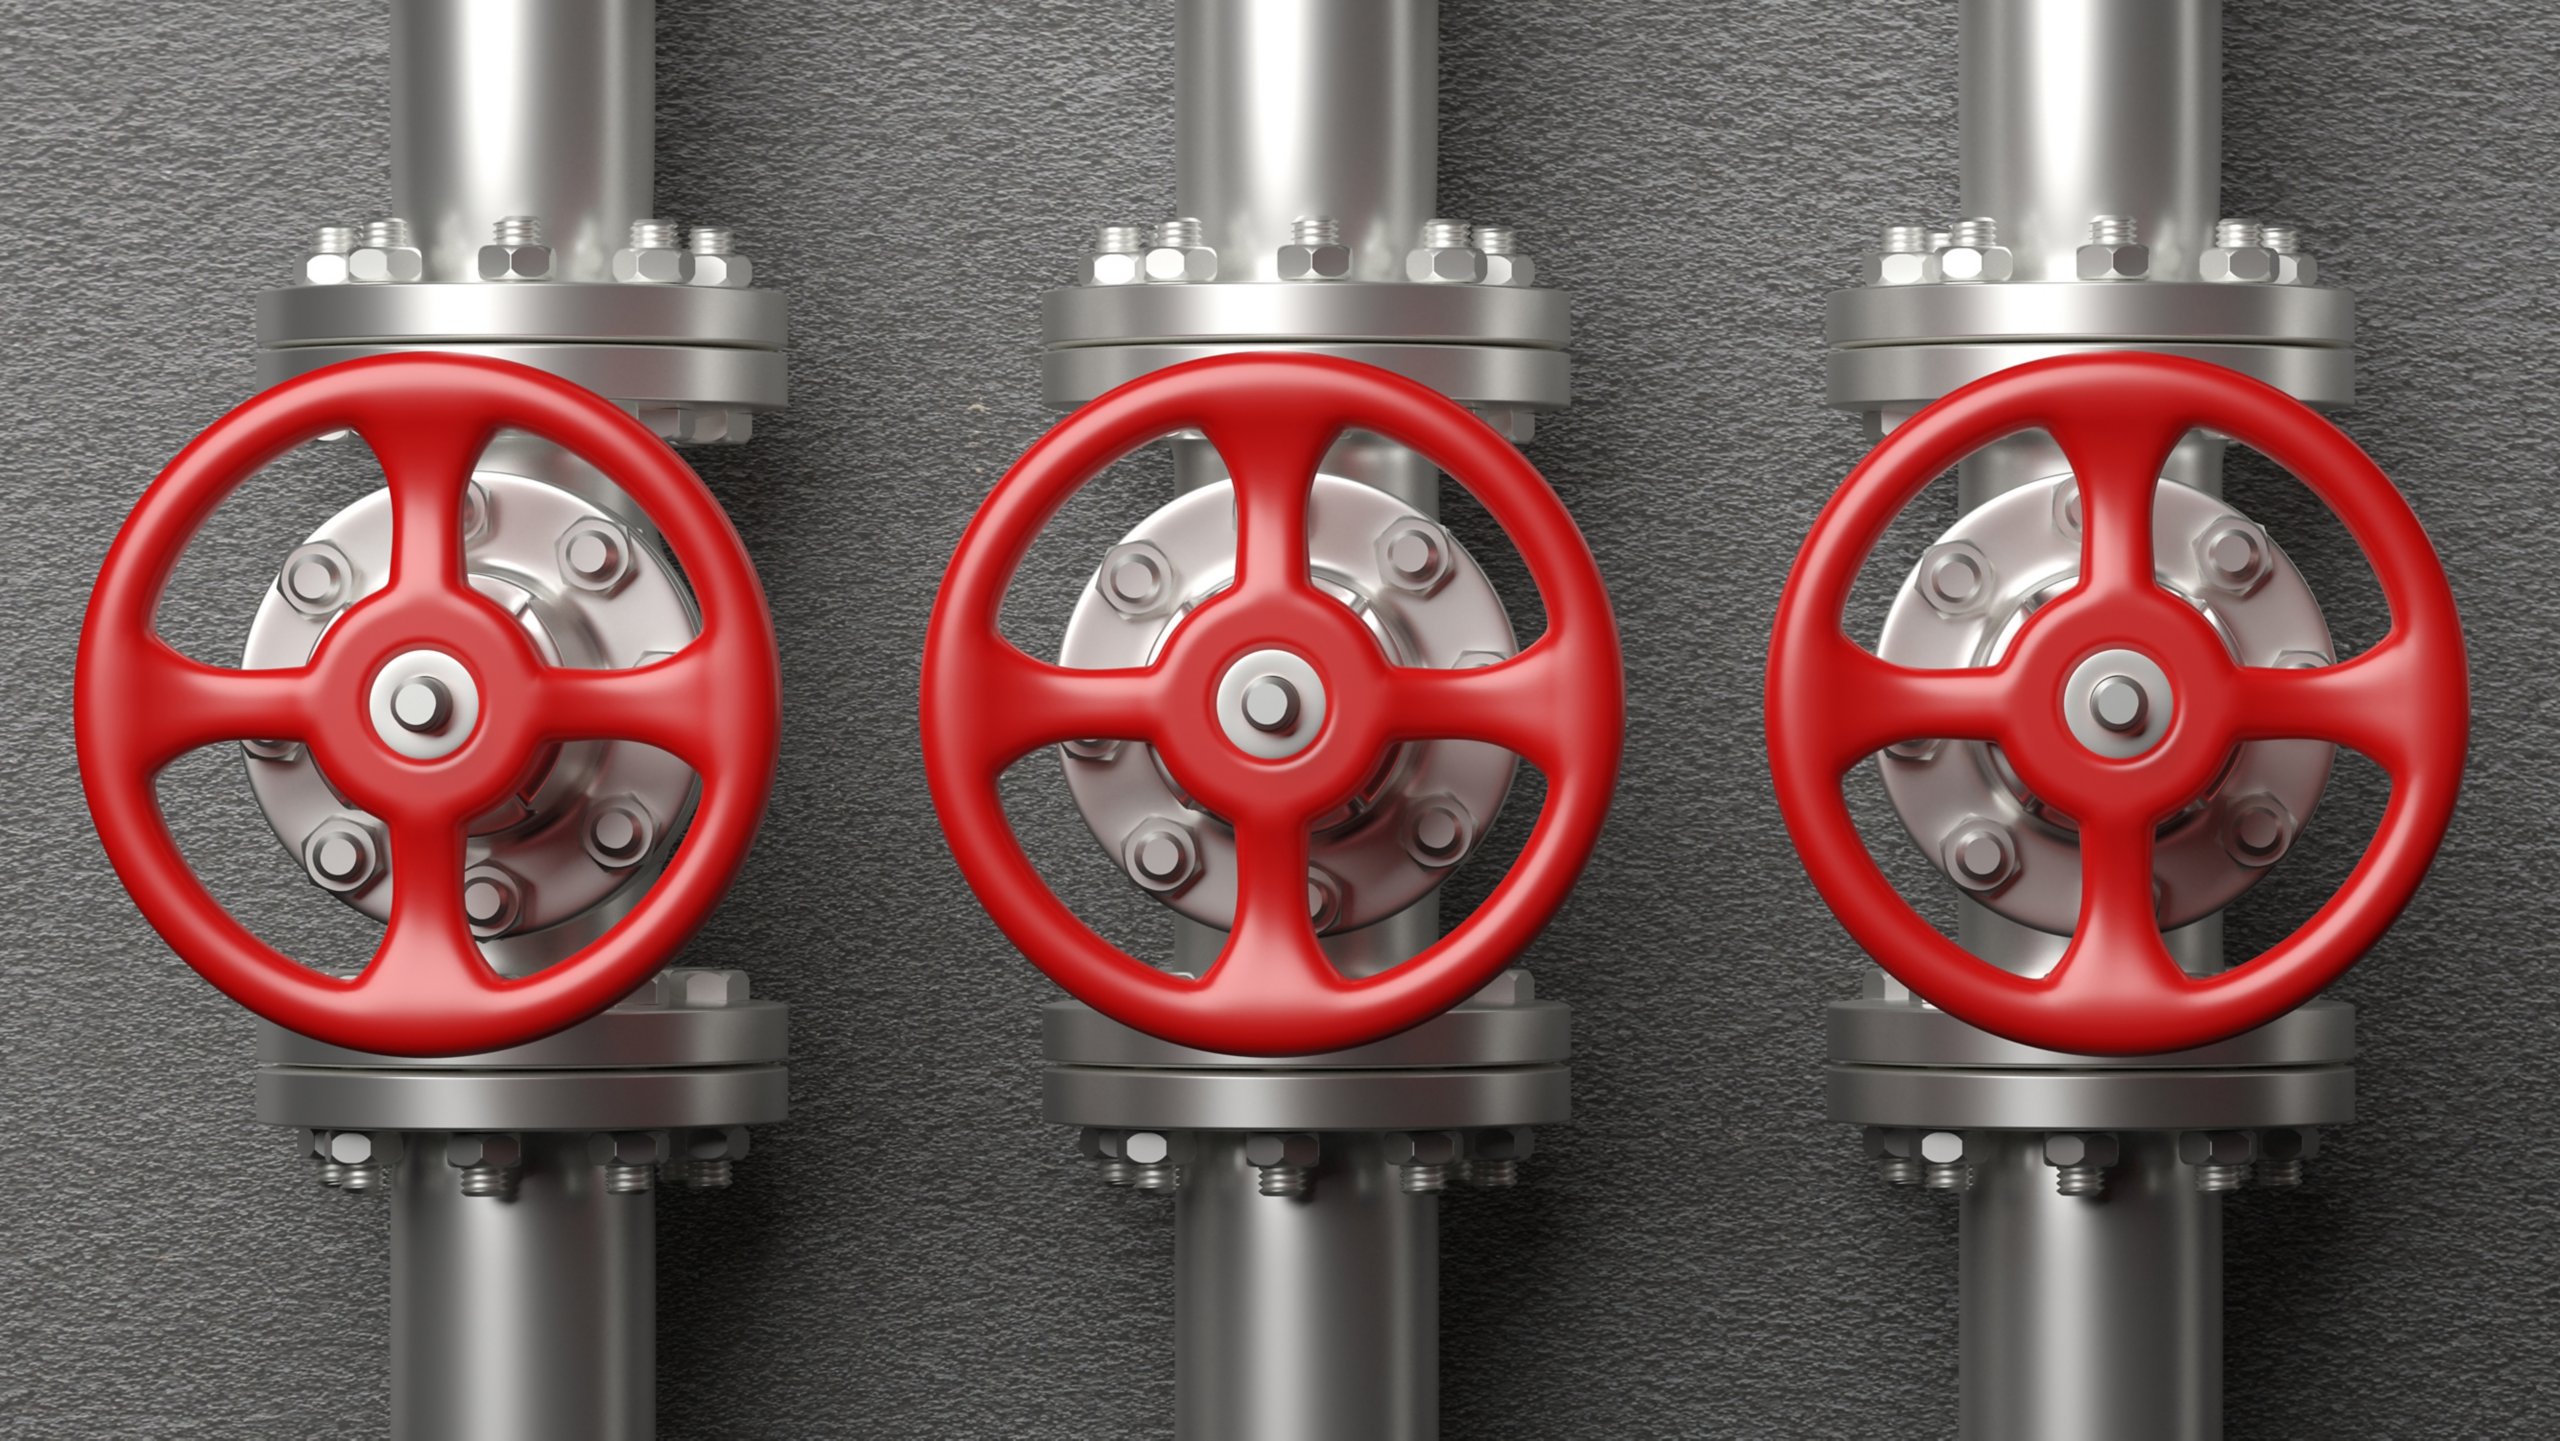 Silver oil & gas pipelines and valves with red wheels to secure critical infrastructure OT system.